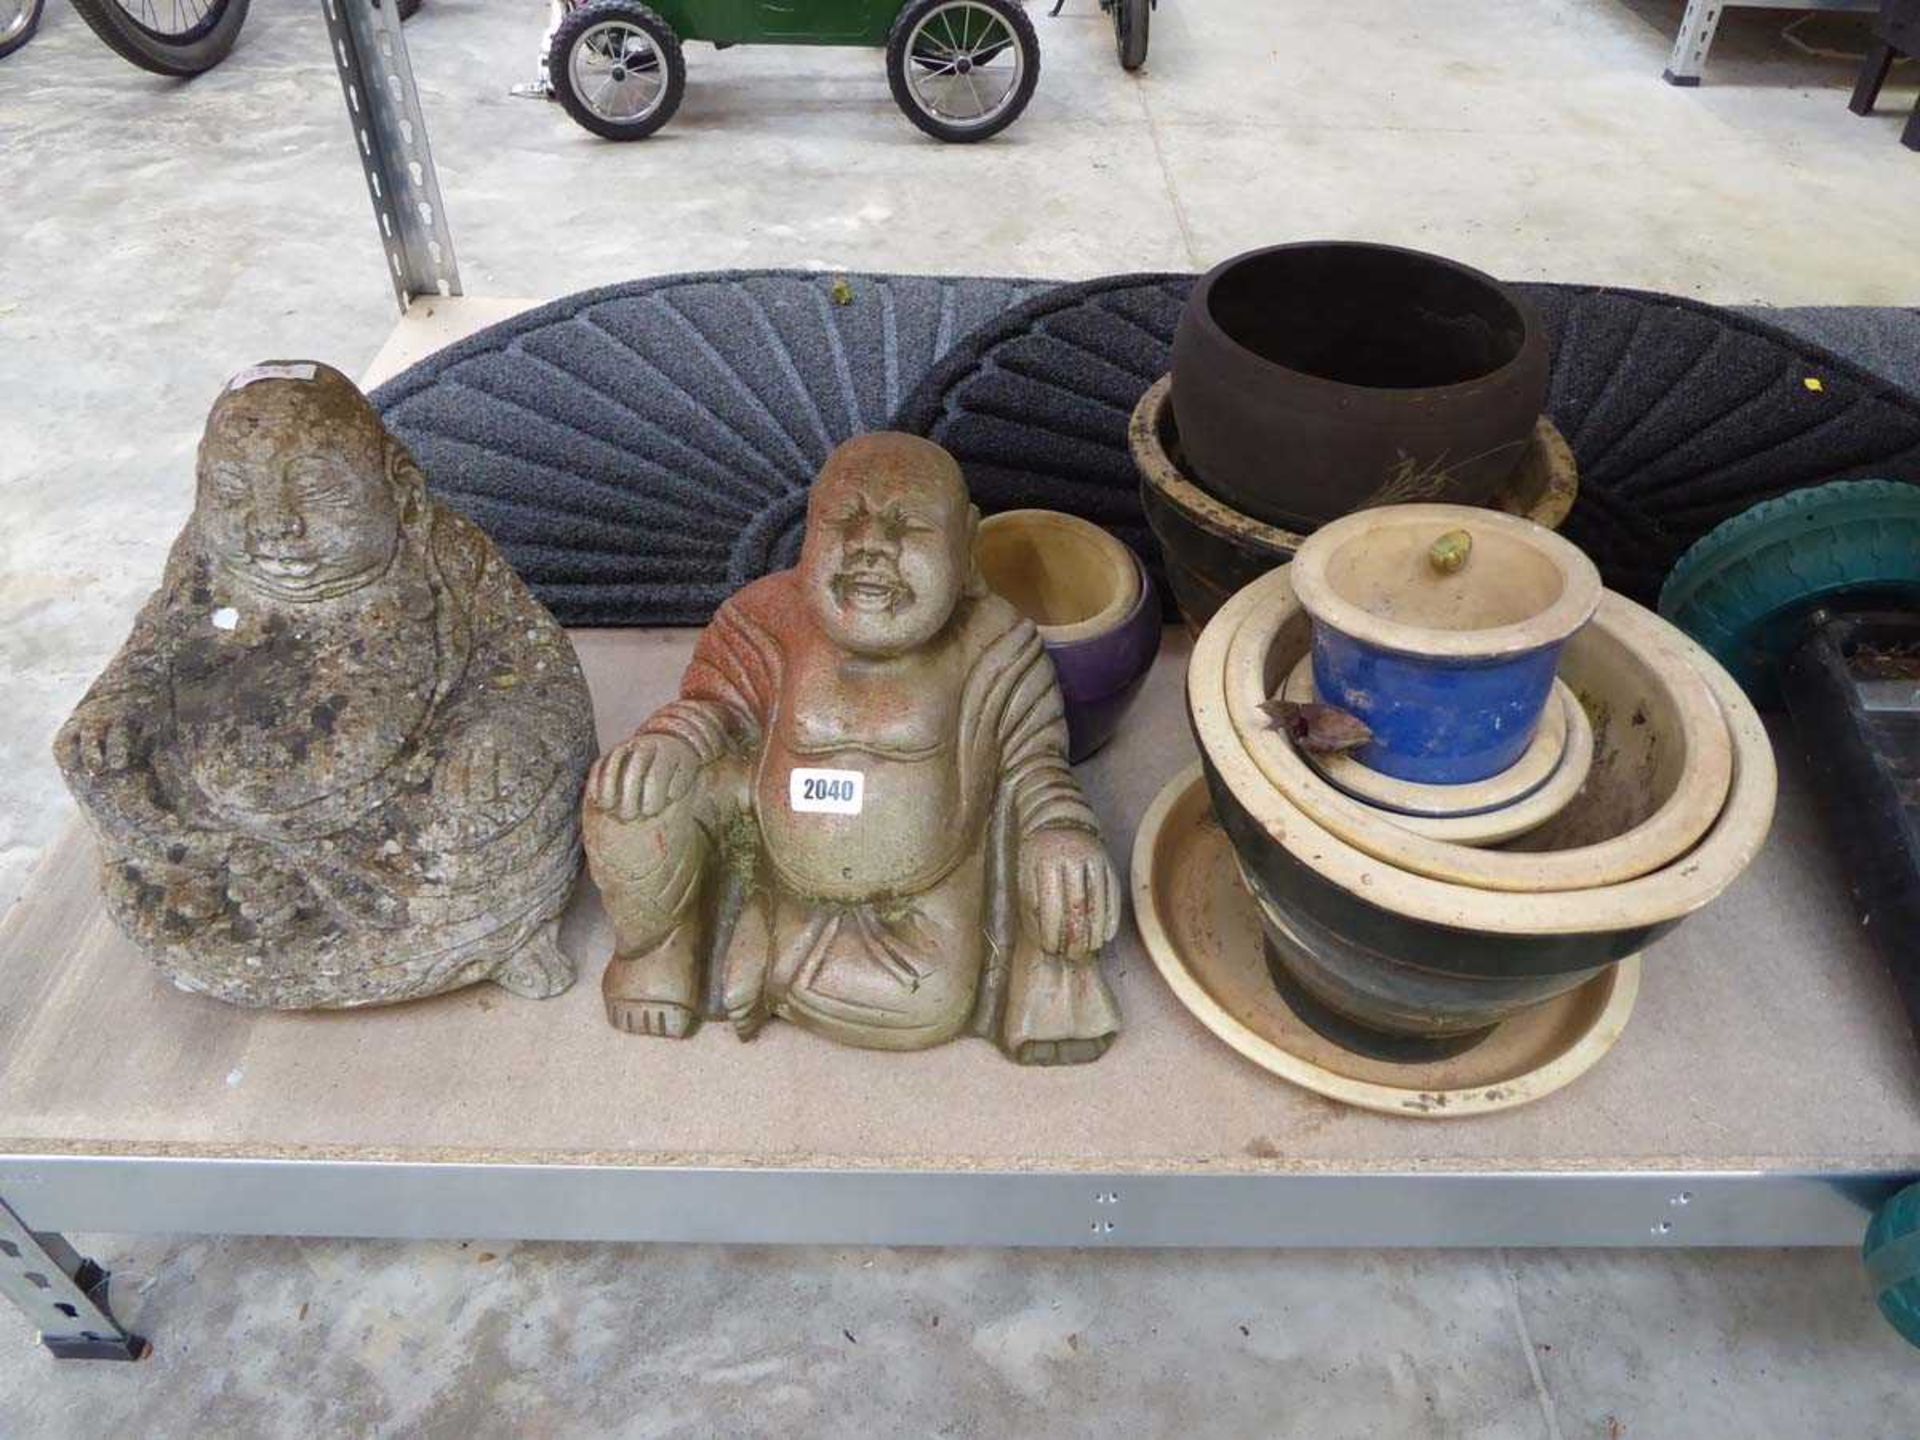 Pair of concrete Buddha statues with ceramic garden pots